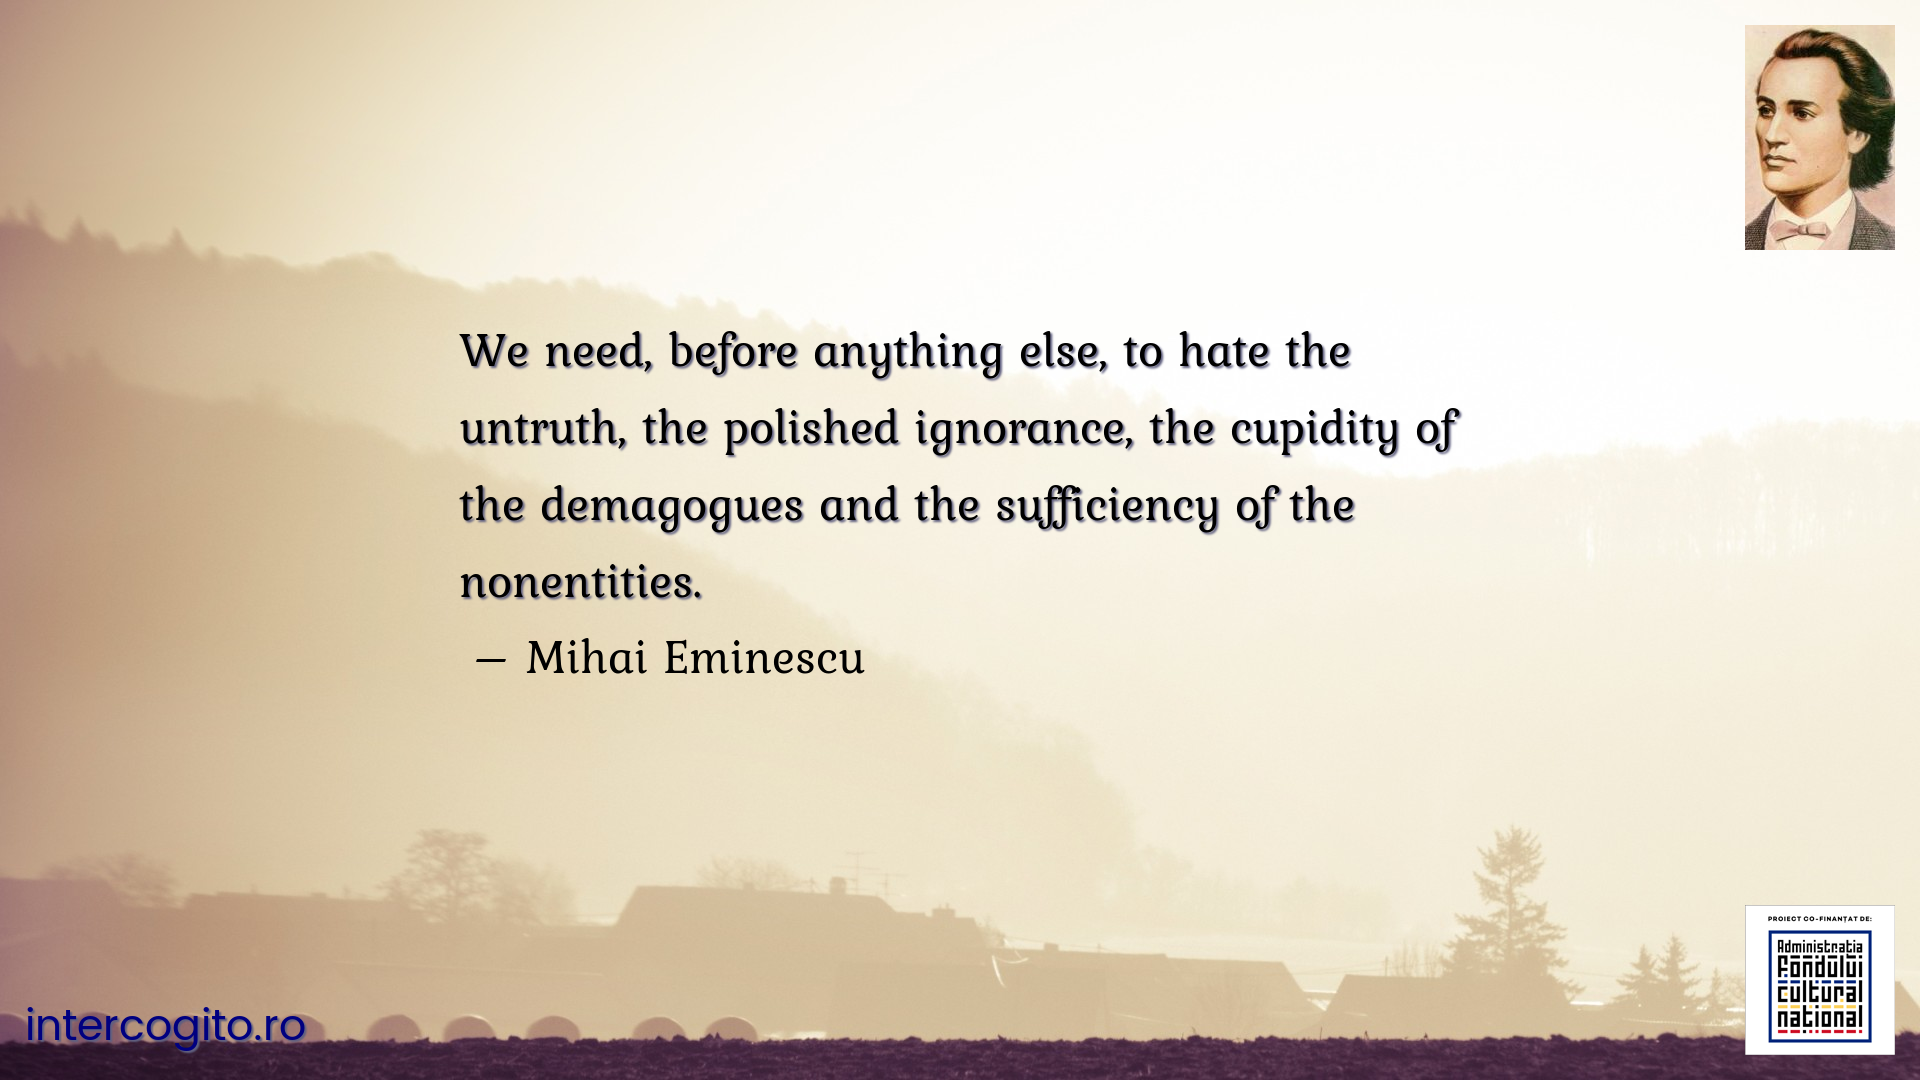 We need, before anything else, to hate the untruth, the polished ignorance, the cupidity of the demagogues and the sufficiency of the nonentities.